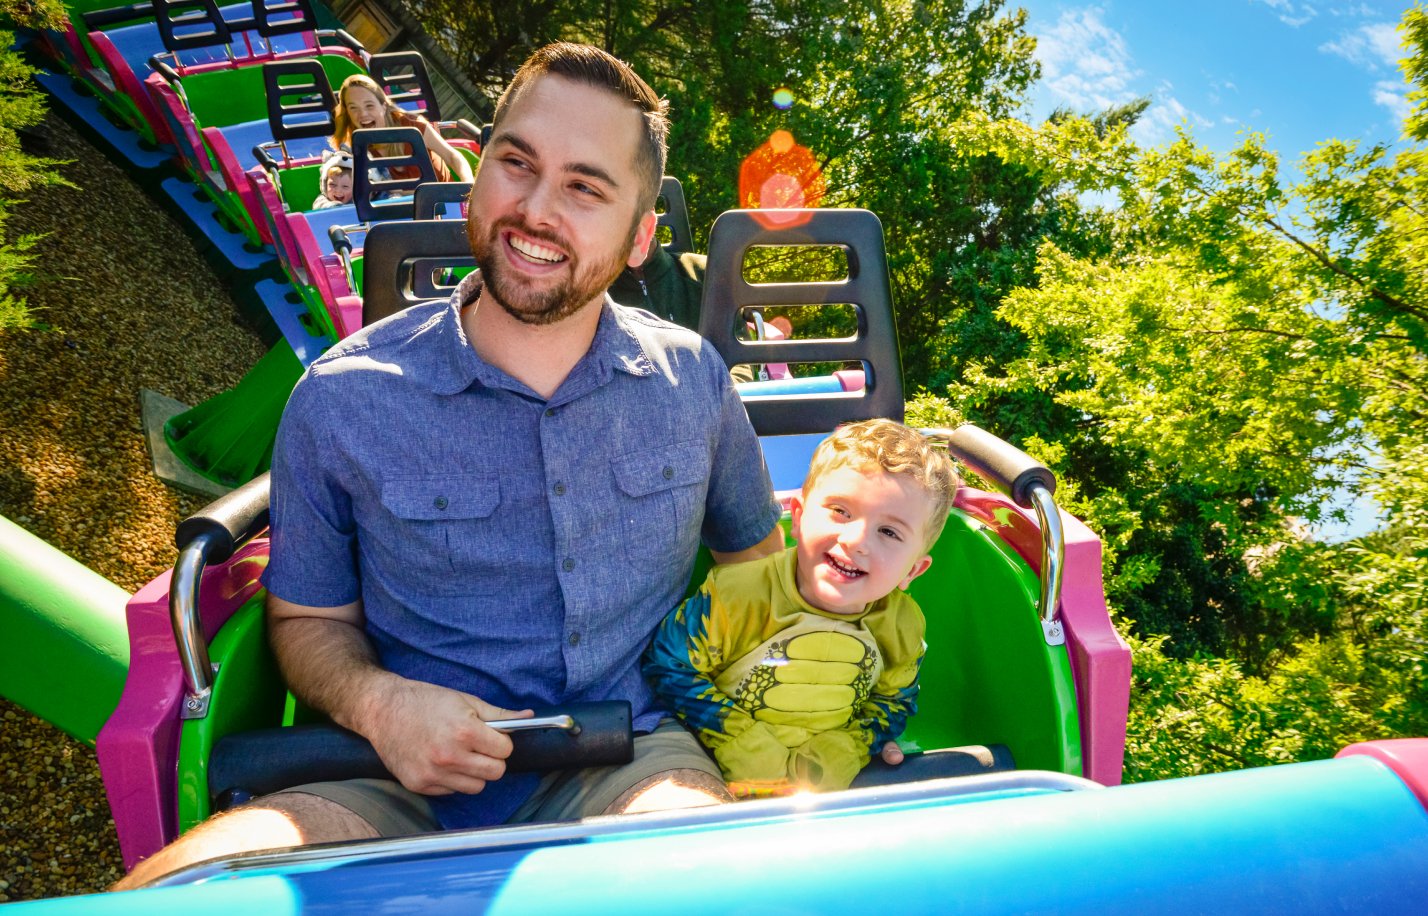 A family enjoying the Kids Play Free Vacation Package at Busch Gardens Williamsburg.